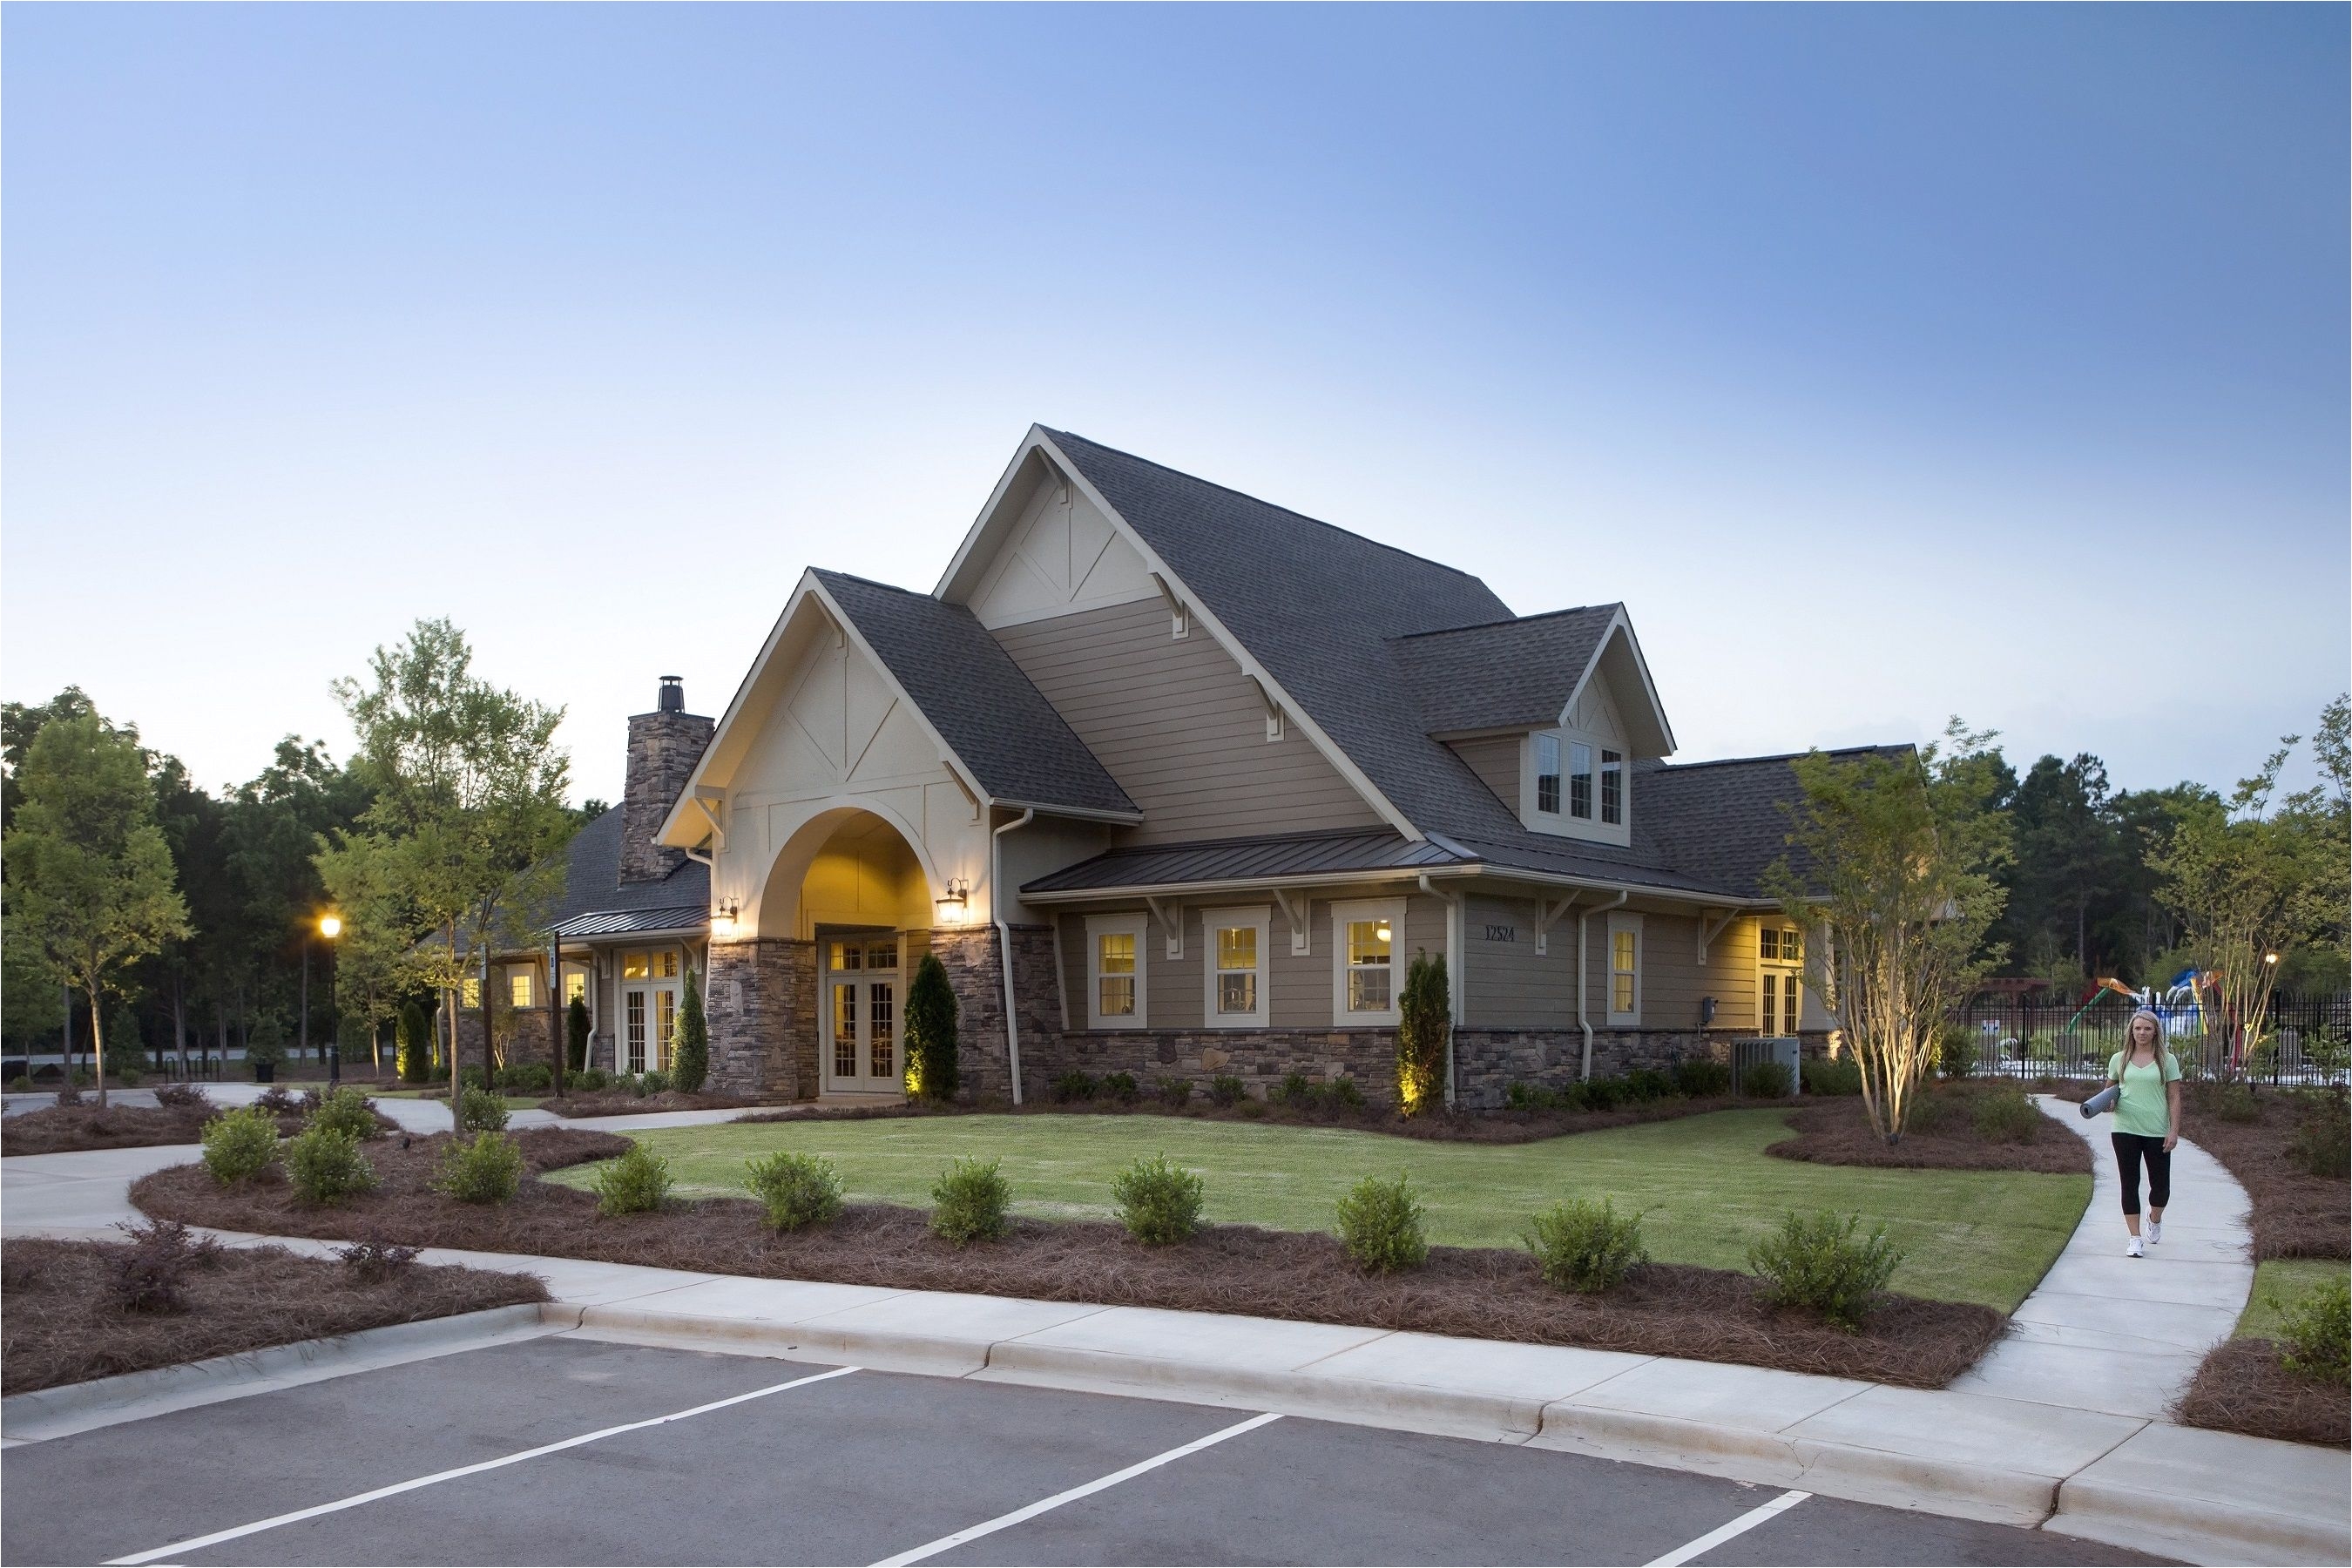 chapel cove located on the shores of lake wylie outside of charlotte recently opened